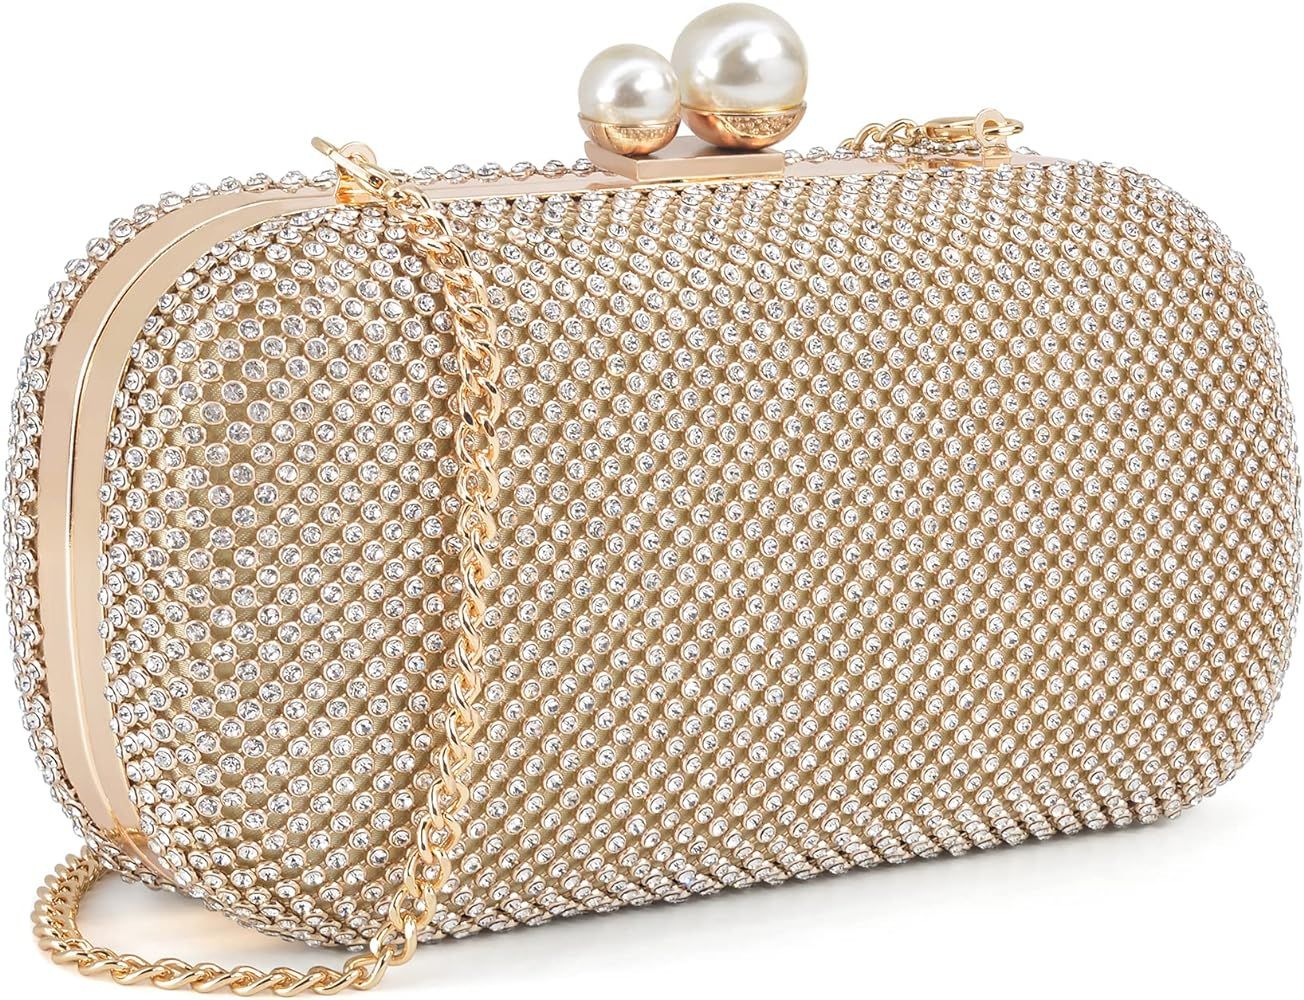 Crystal Evening Clutch Woman Evening Bag For Party and wedding | Amazon (US)